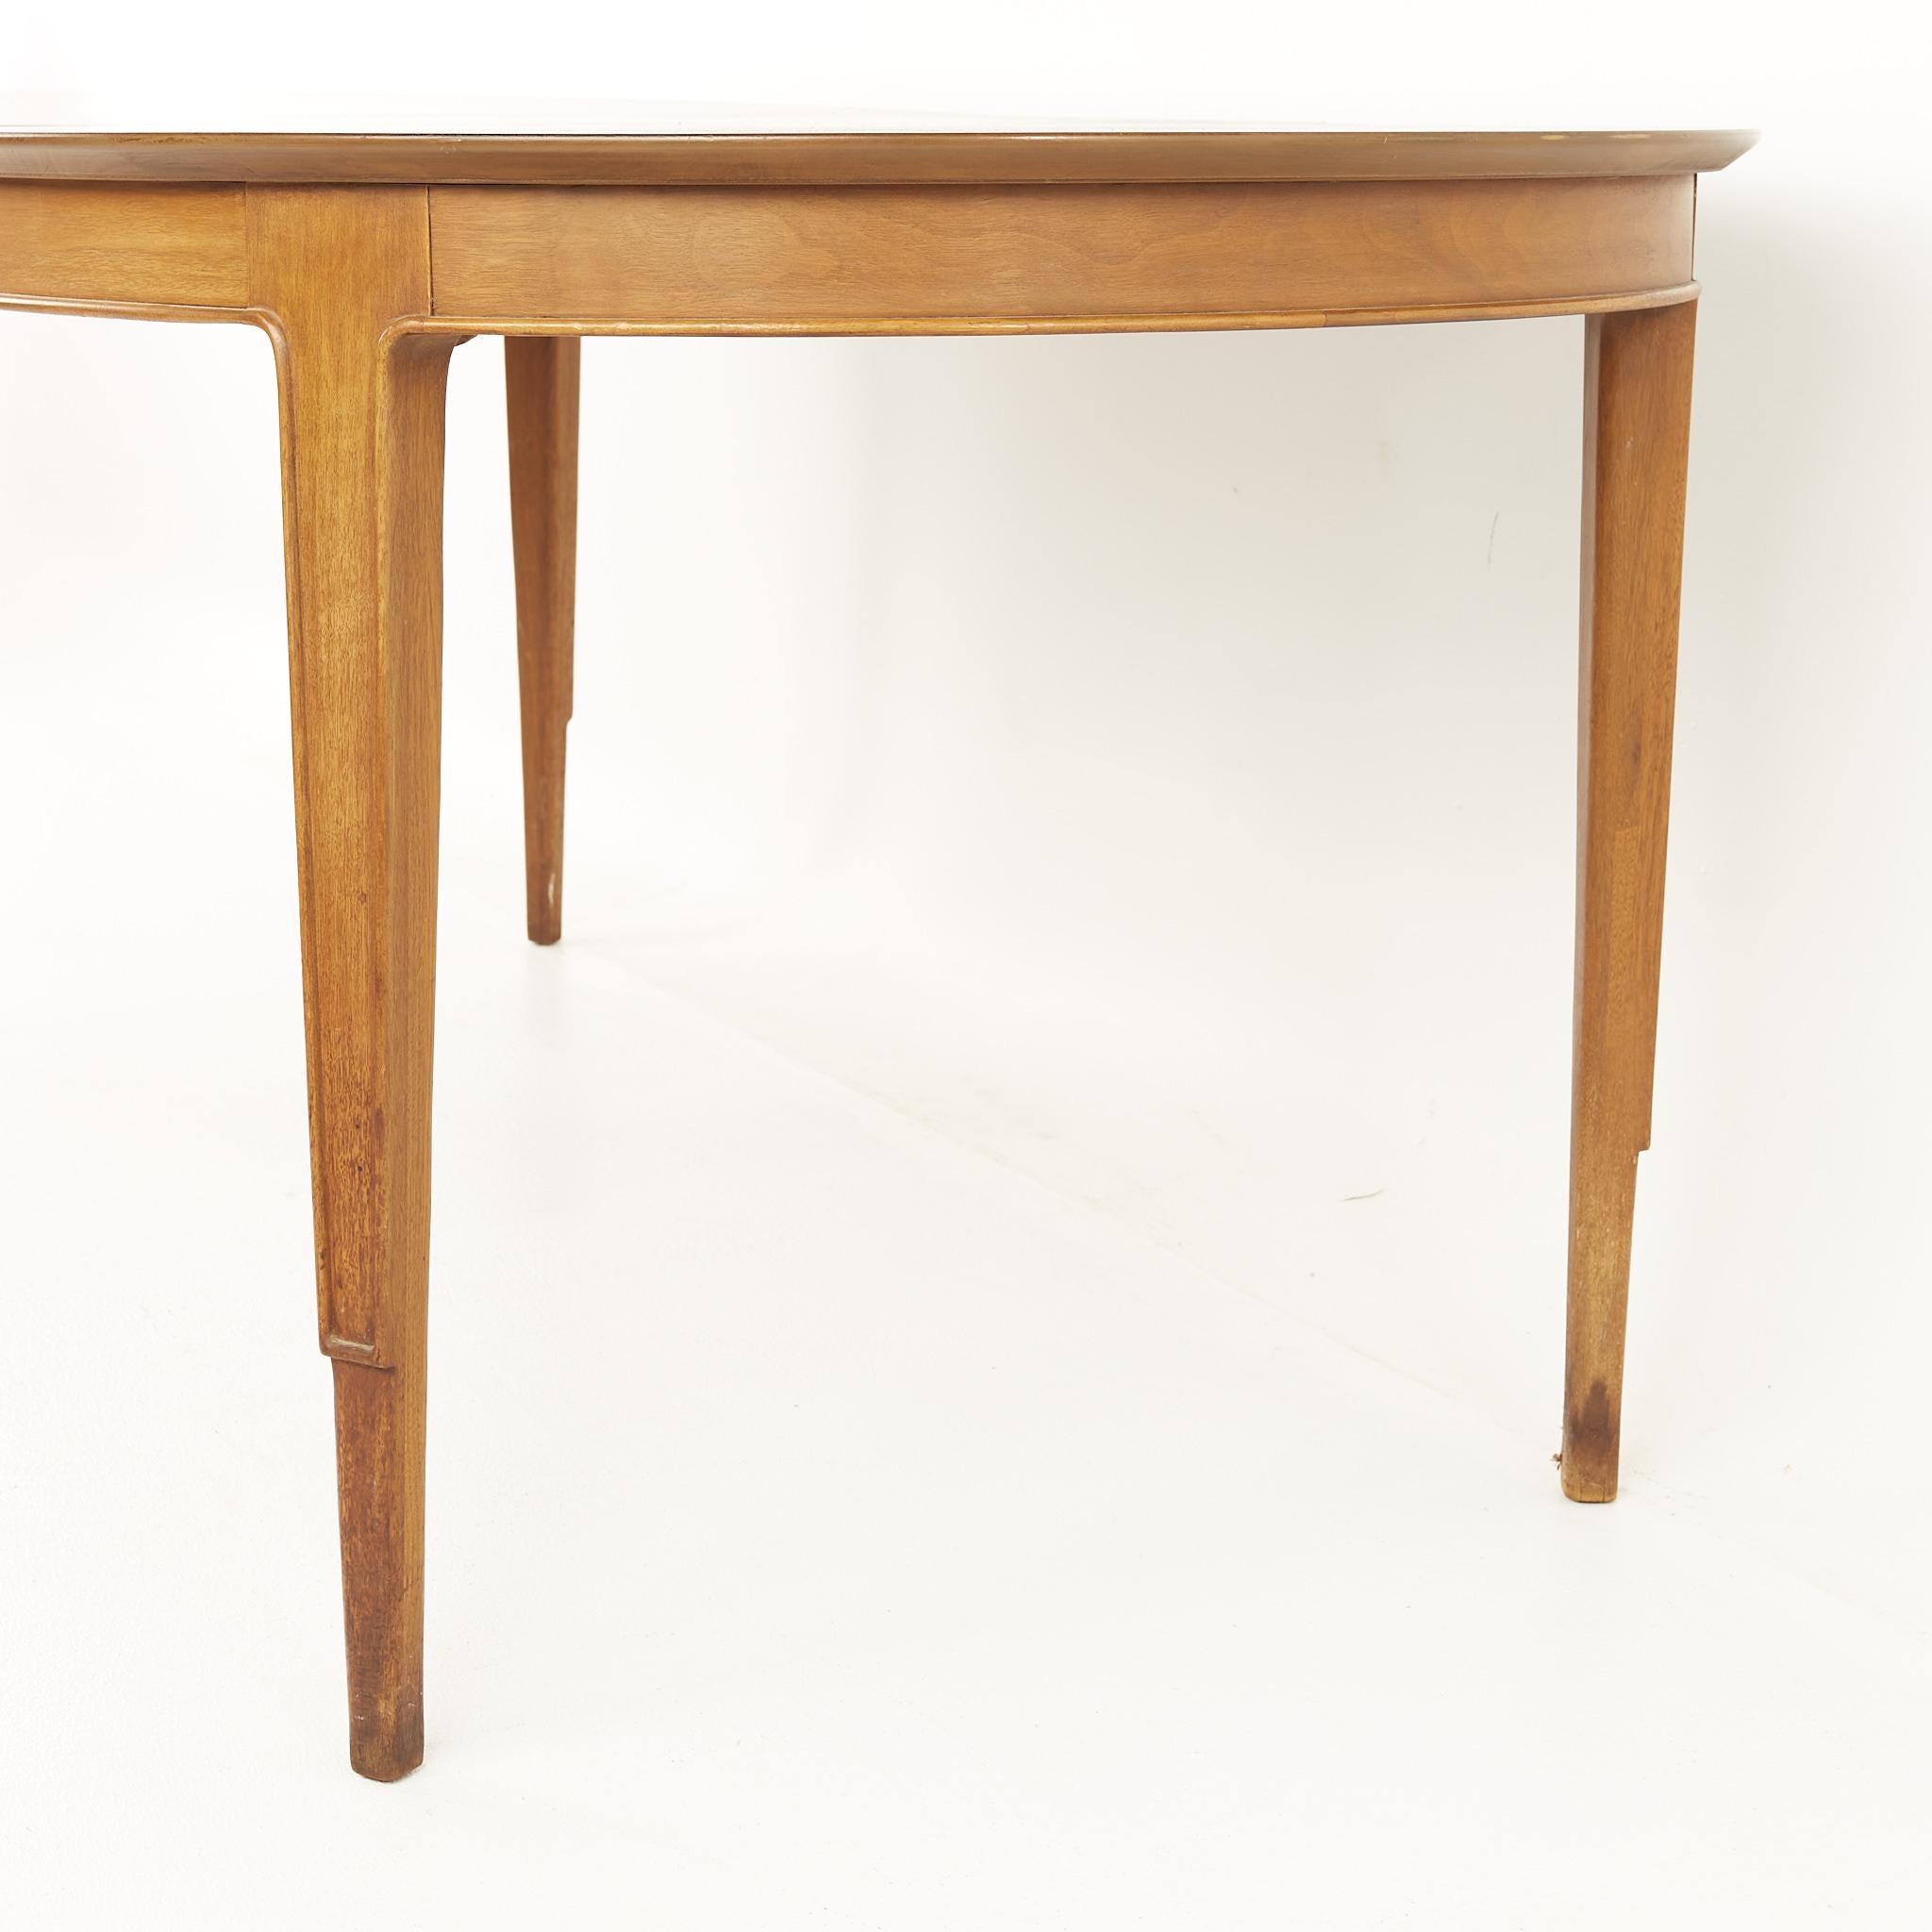 Mount Airy Janus Mid Century Dining Table with 2 Leaves 9